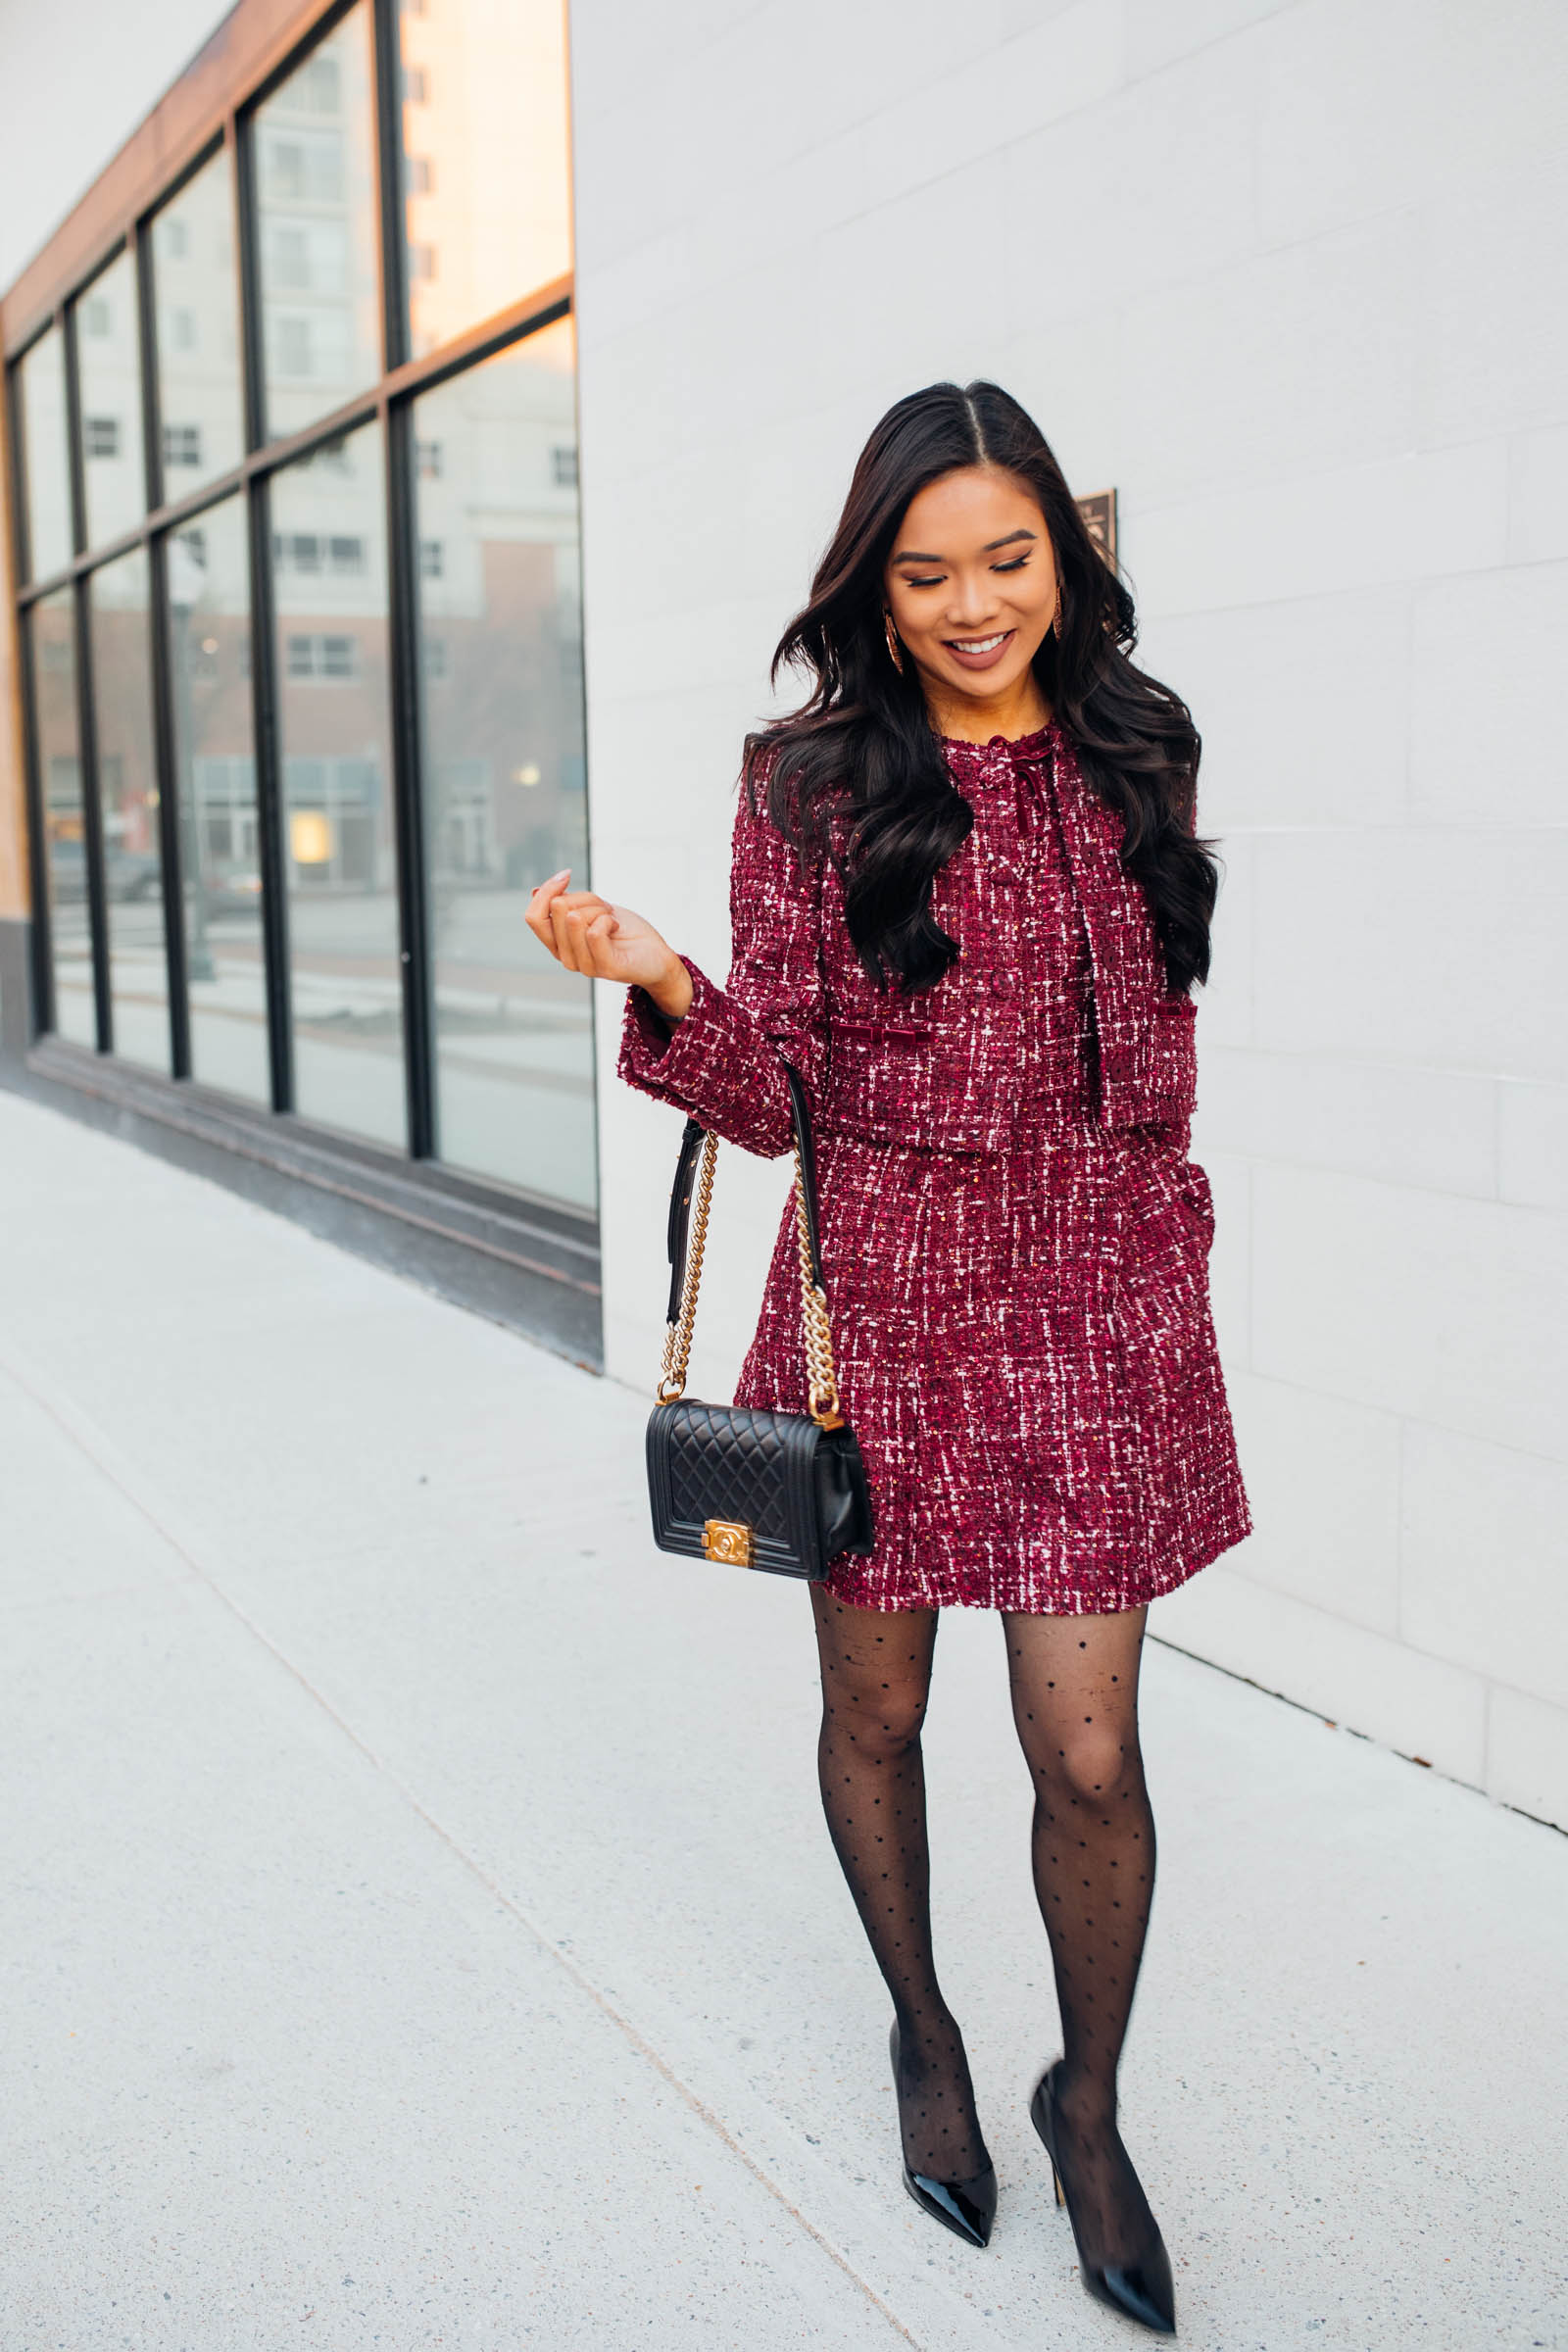 Blogger Hoang-Kim wears a tweed two piece outfit for a holiday party